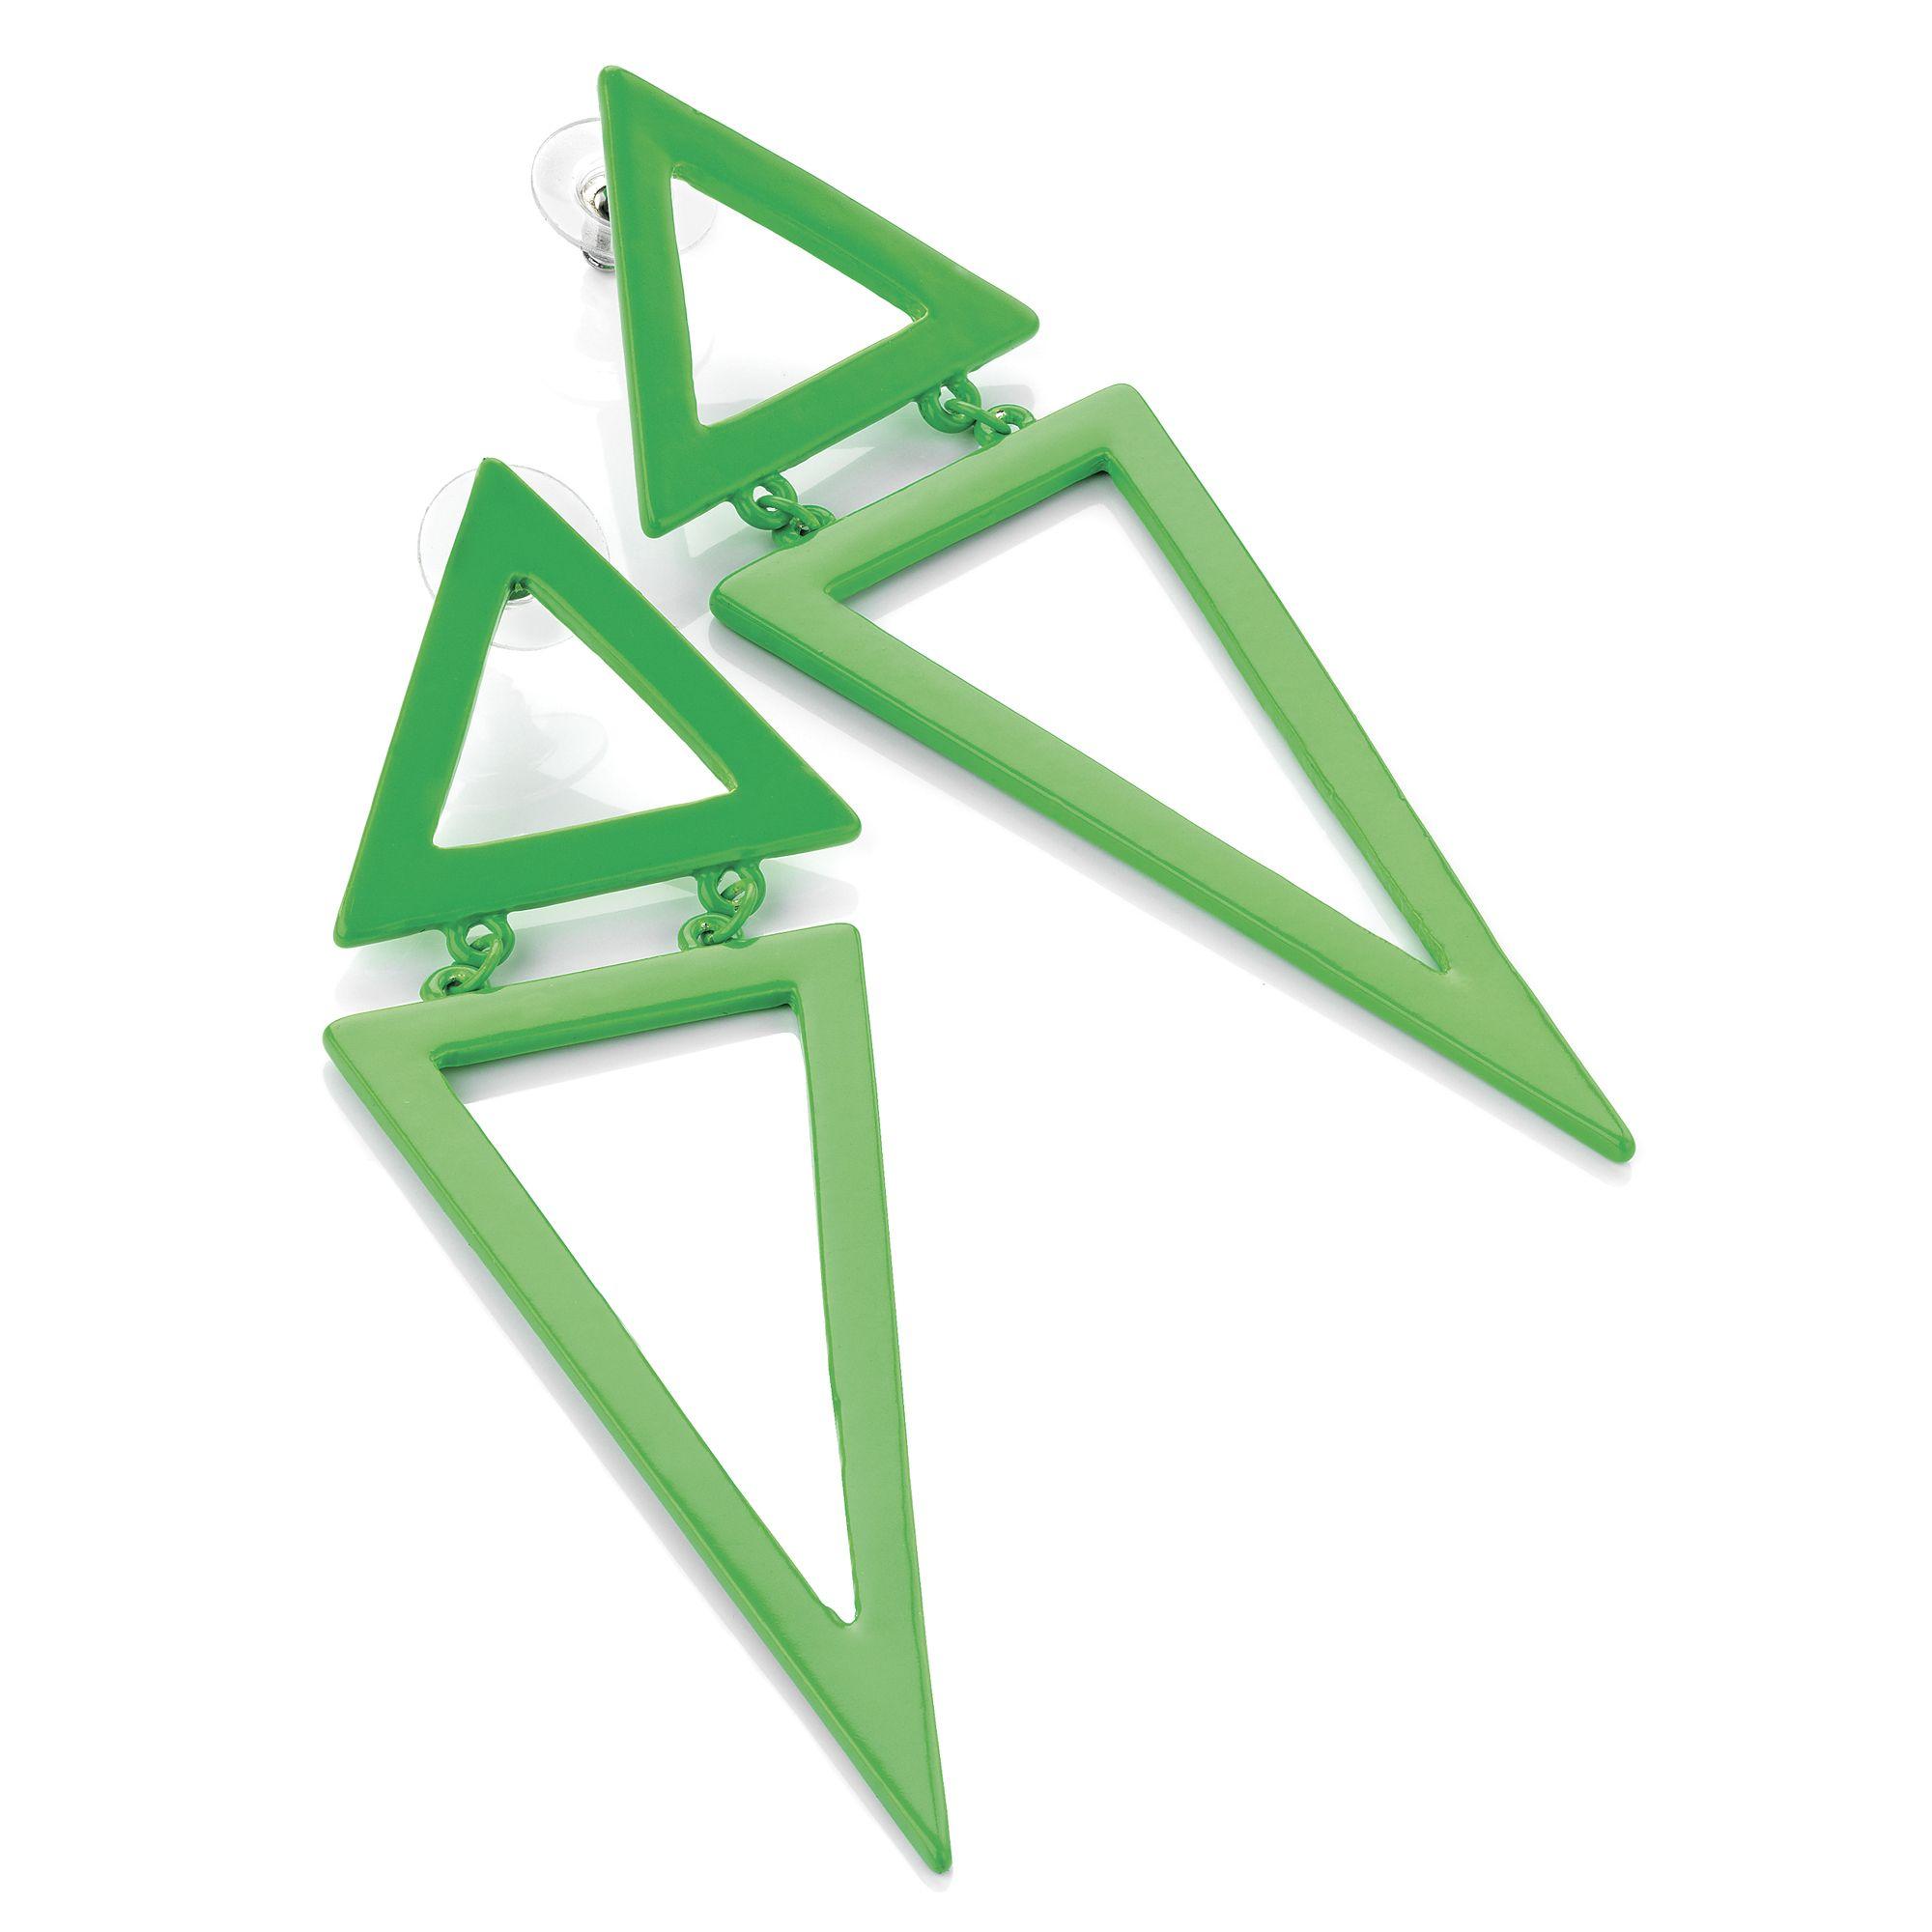 Neon Green Triangle Logo - Was 1.25 Each Now Only 0.45p Each! Neon green colour enamel triangle